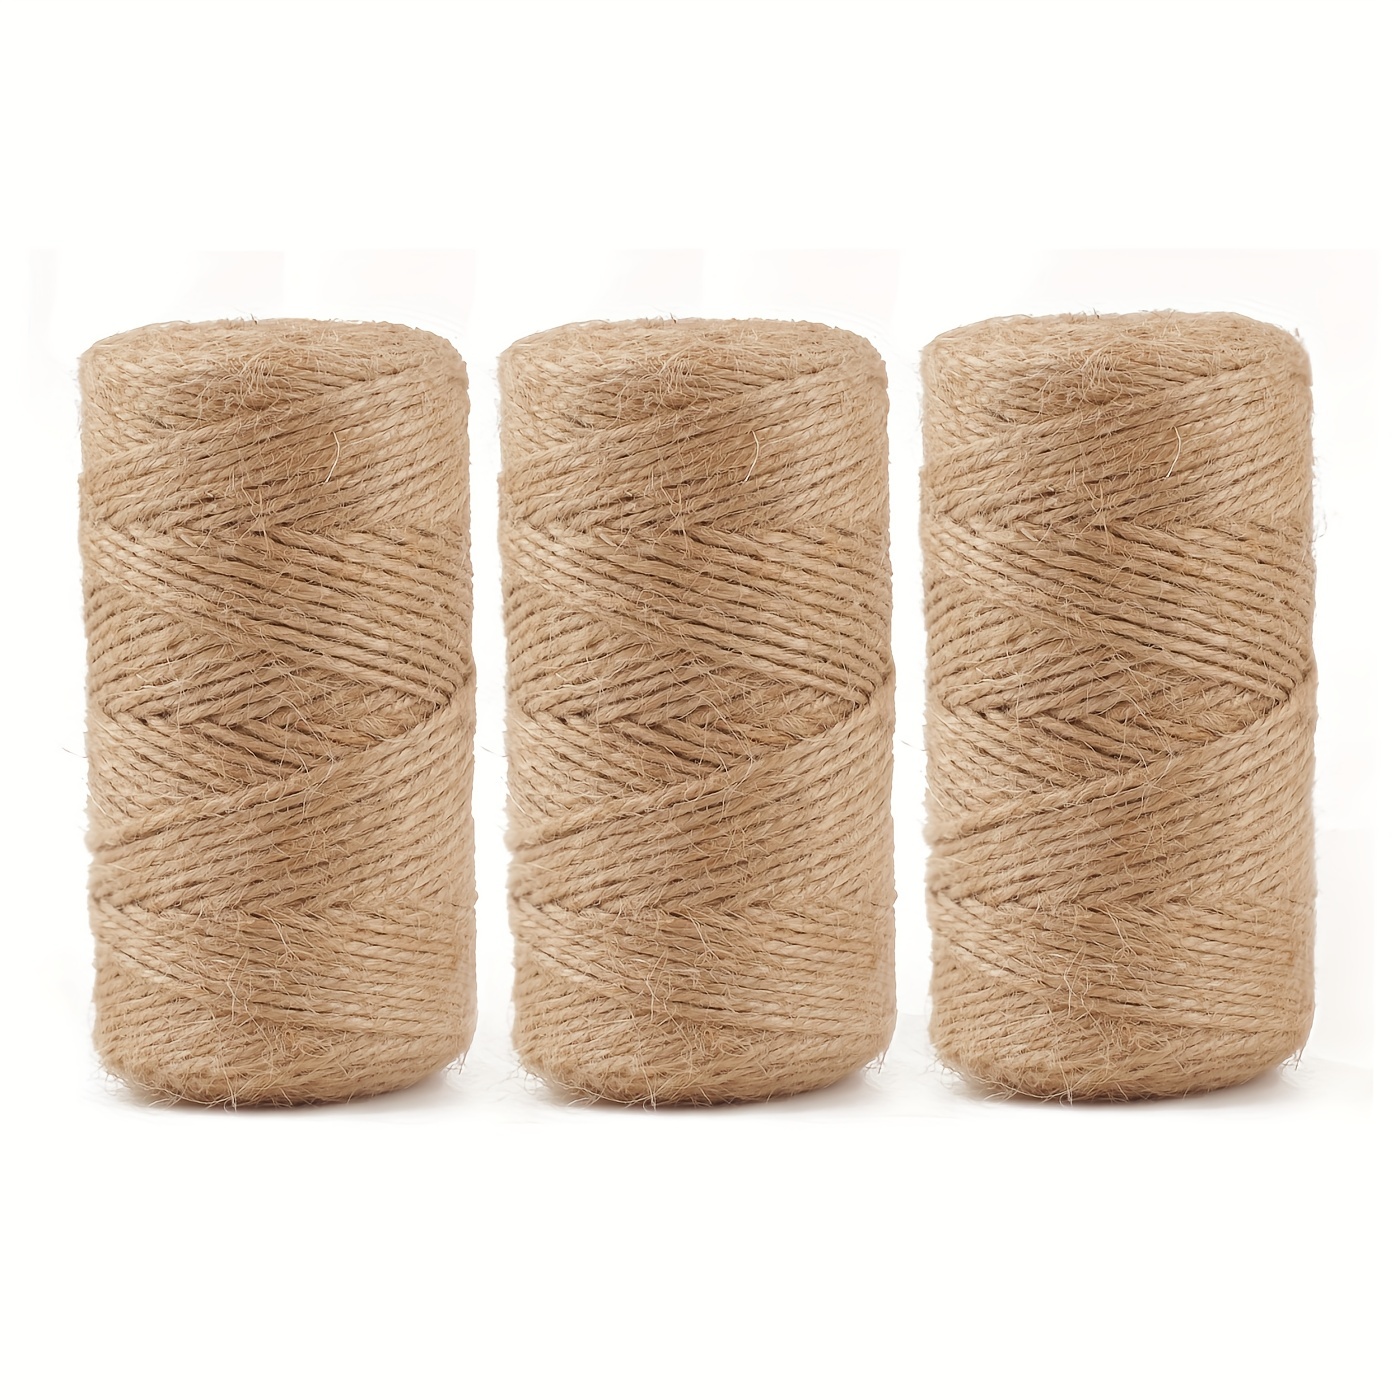 PerkHomy 1100 Feet Jute Twine String 2mm Natural Thin Twine for Crafts Gardening Garden Plant Gift Wrapping Art Decoration Packing Material